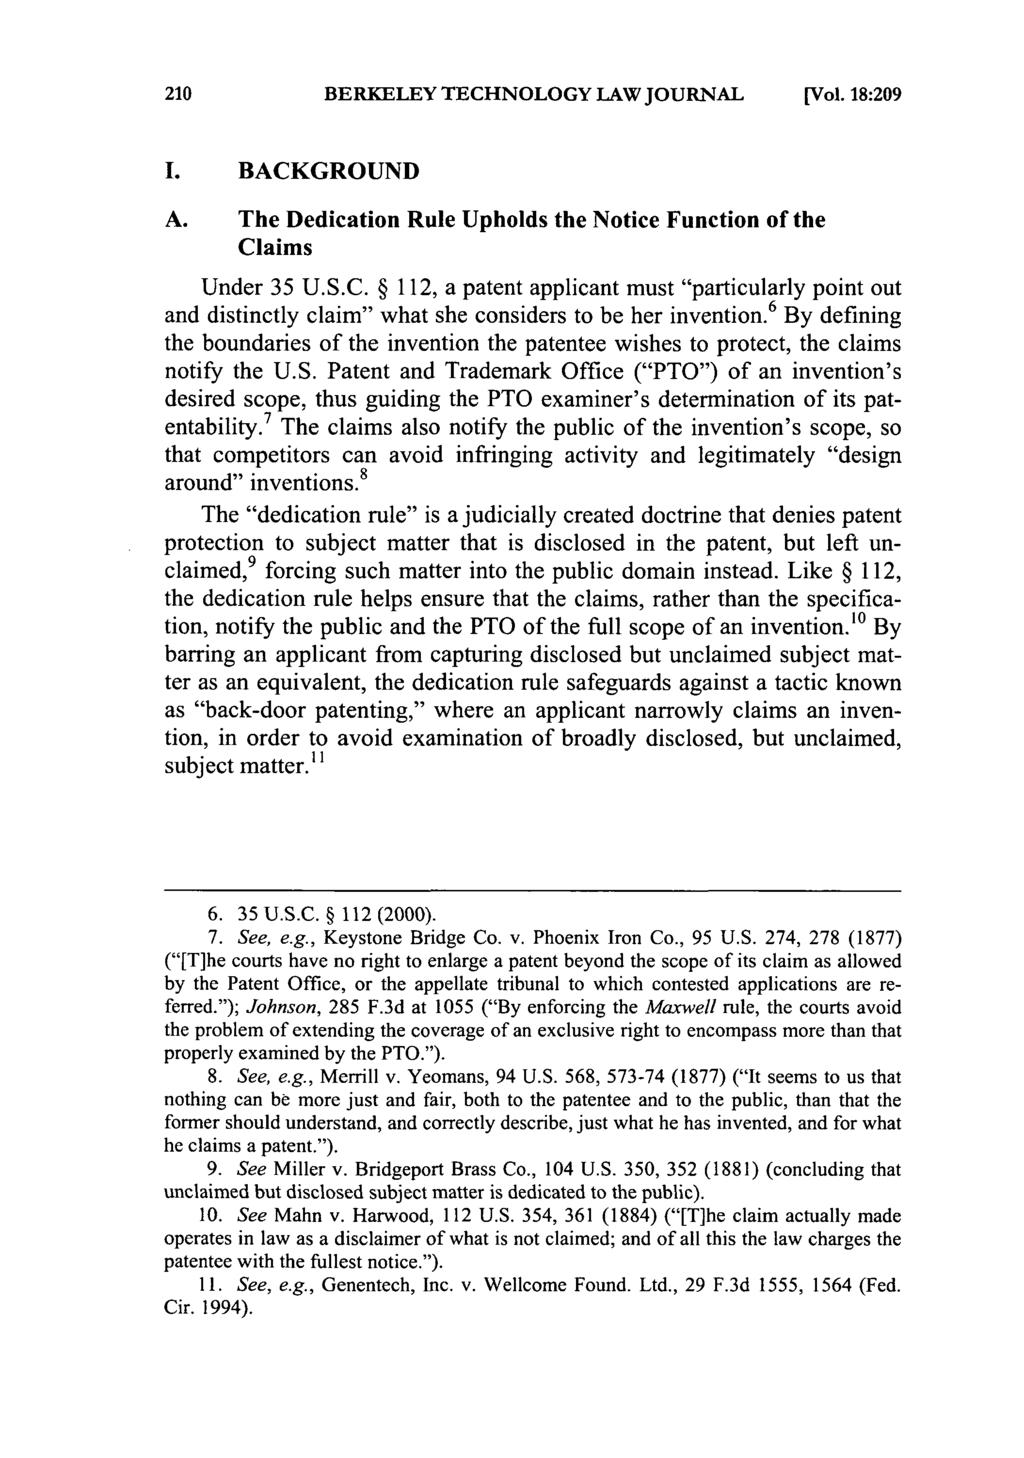 BERKELEY TECHNOLOGY LAW JOURNAL [Vol. 18:209 I. BACKGROUND A. The Dedication Rule Upholds the Notice Function of the Claims Under 35 U.S.C. 112, a patent applicant must "particularly point out and distinctly claim" what she considers to be her invention.